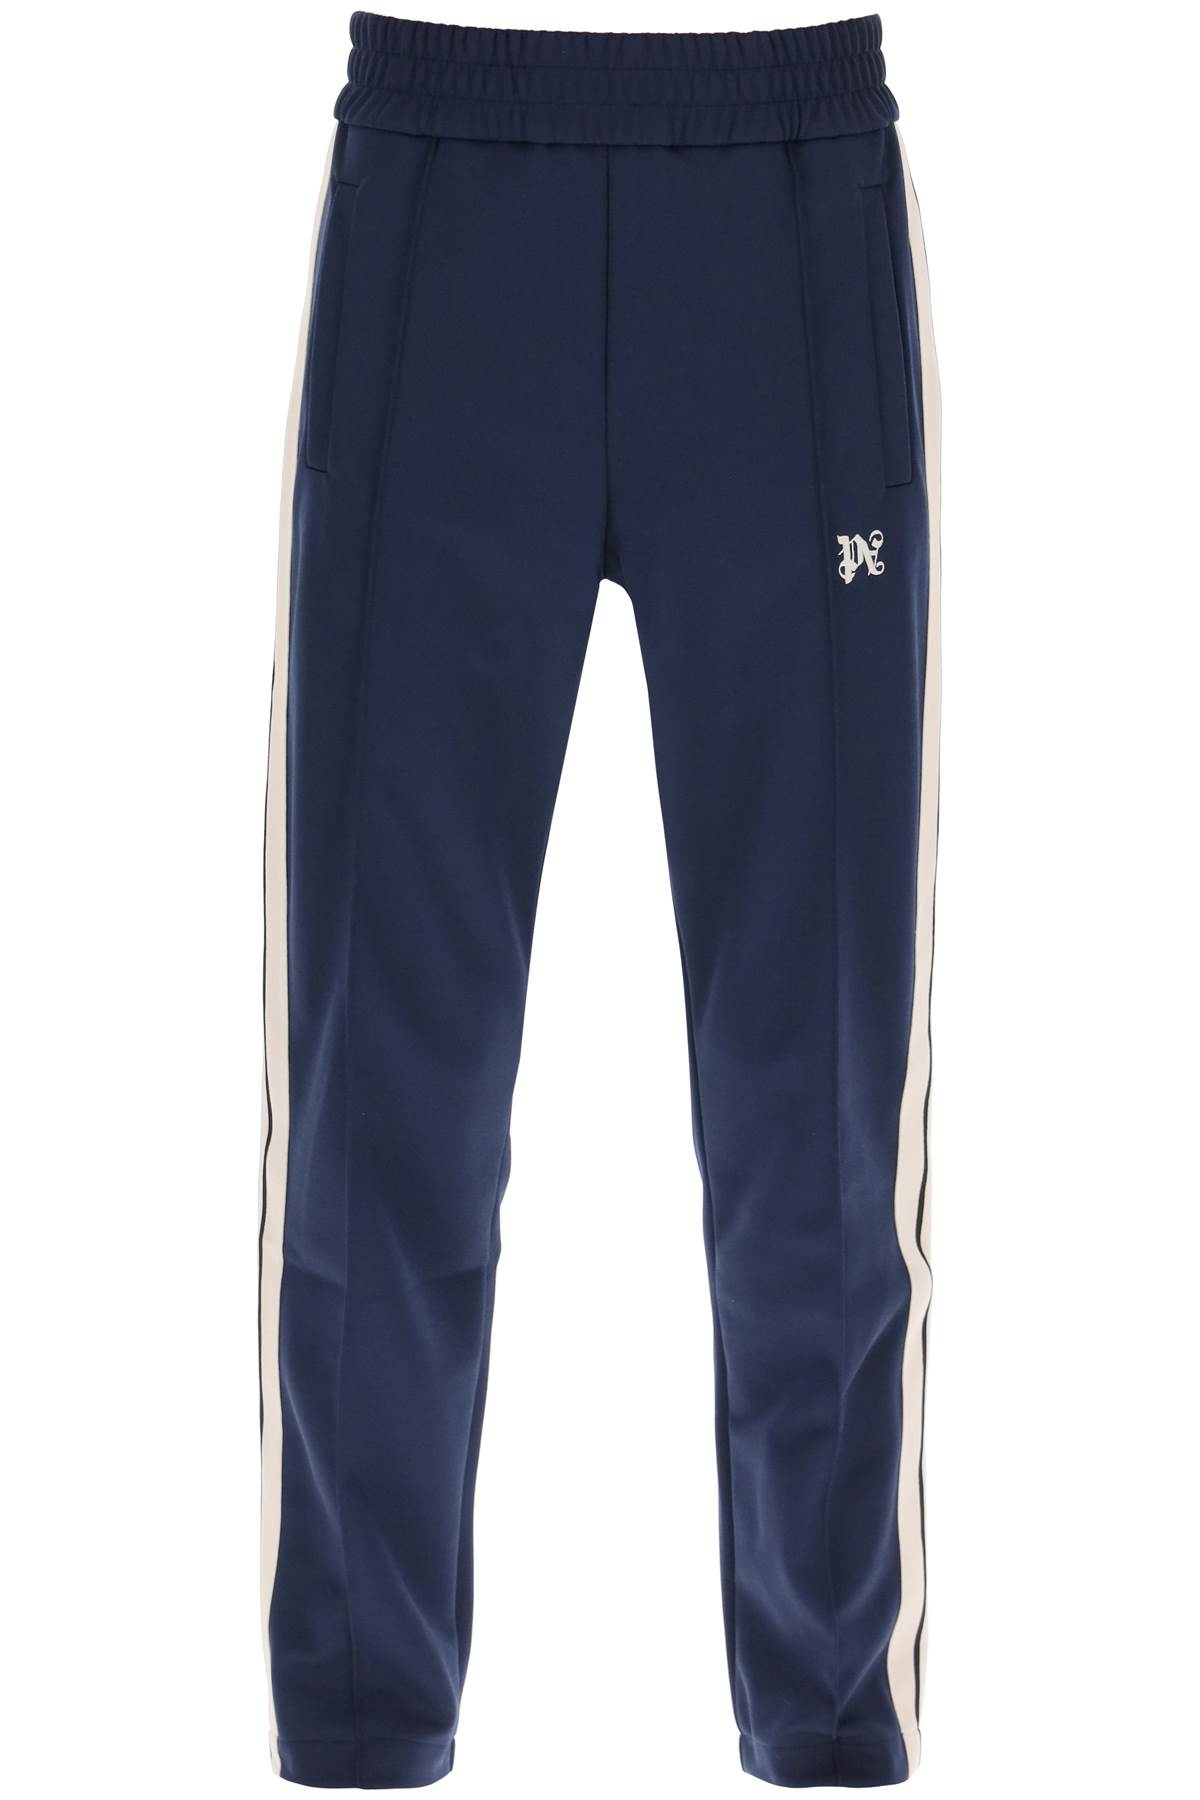 PALM ANGELS TRACK PANTS WITH CONTRASTING SIDE BANDS